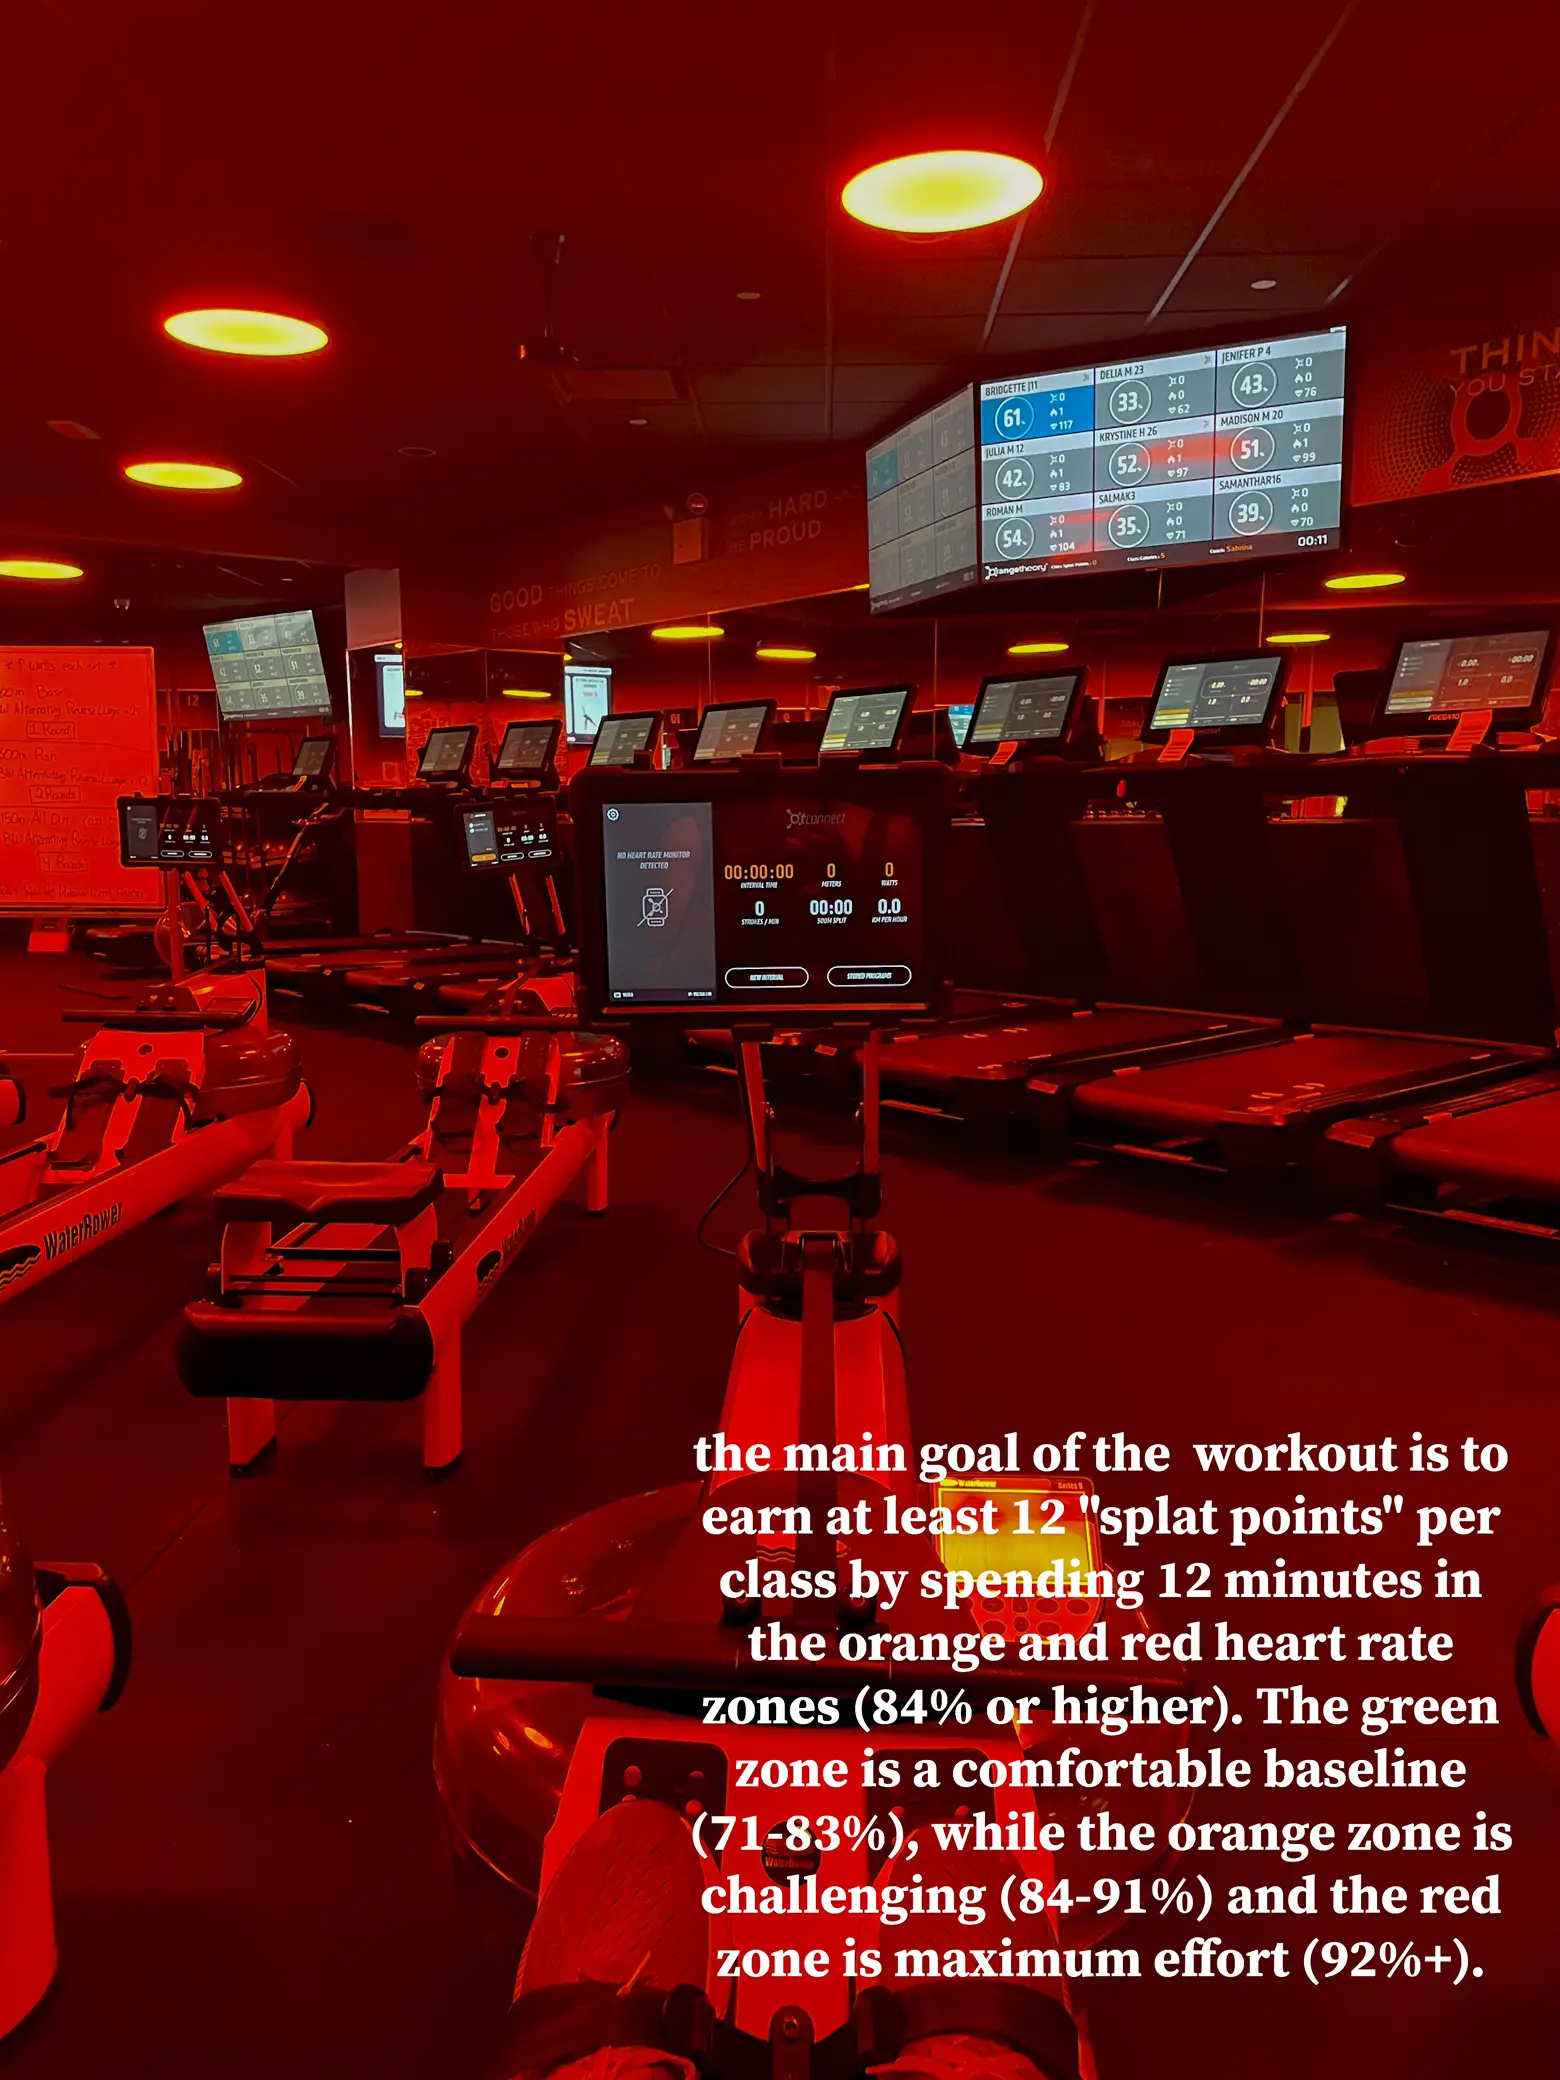 Come with me to Orangetheory!  Gallery posted by Kingkrystine